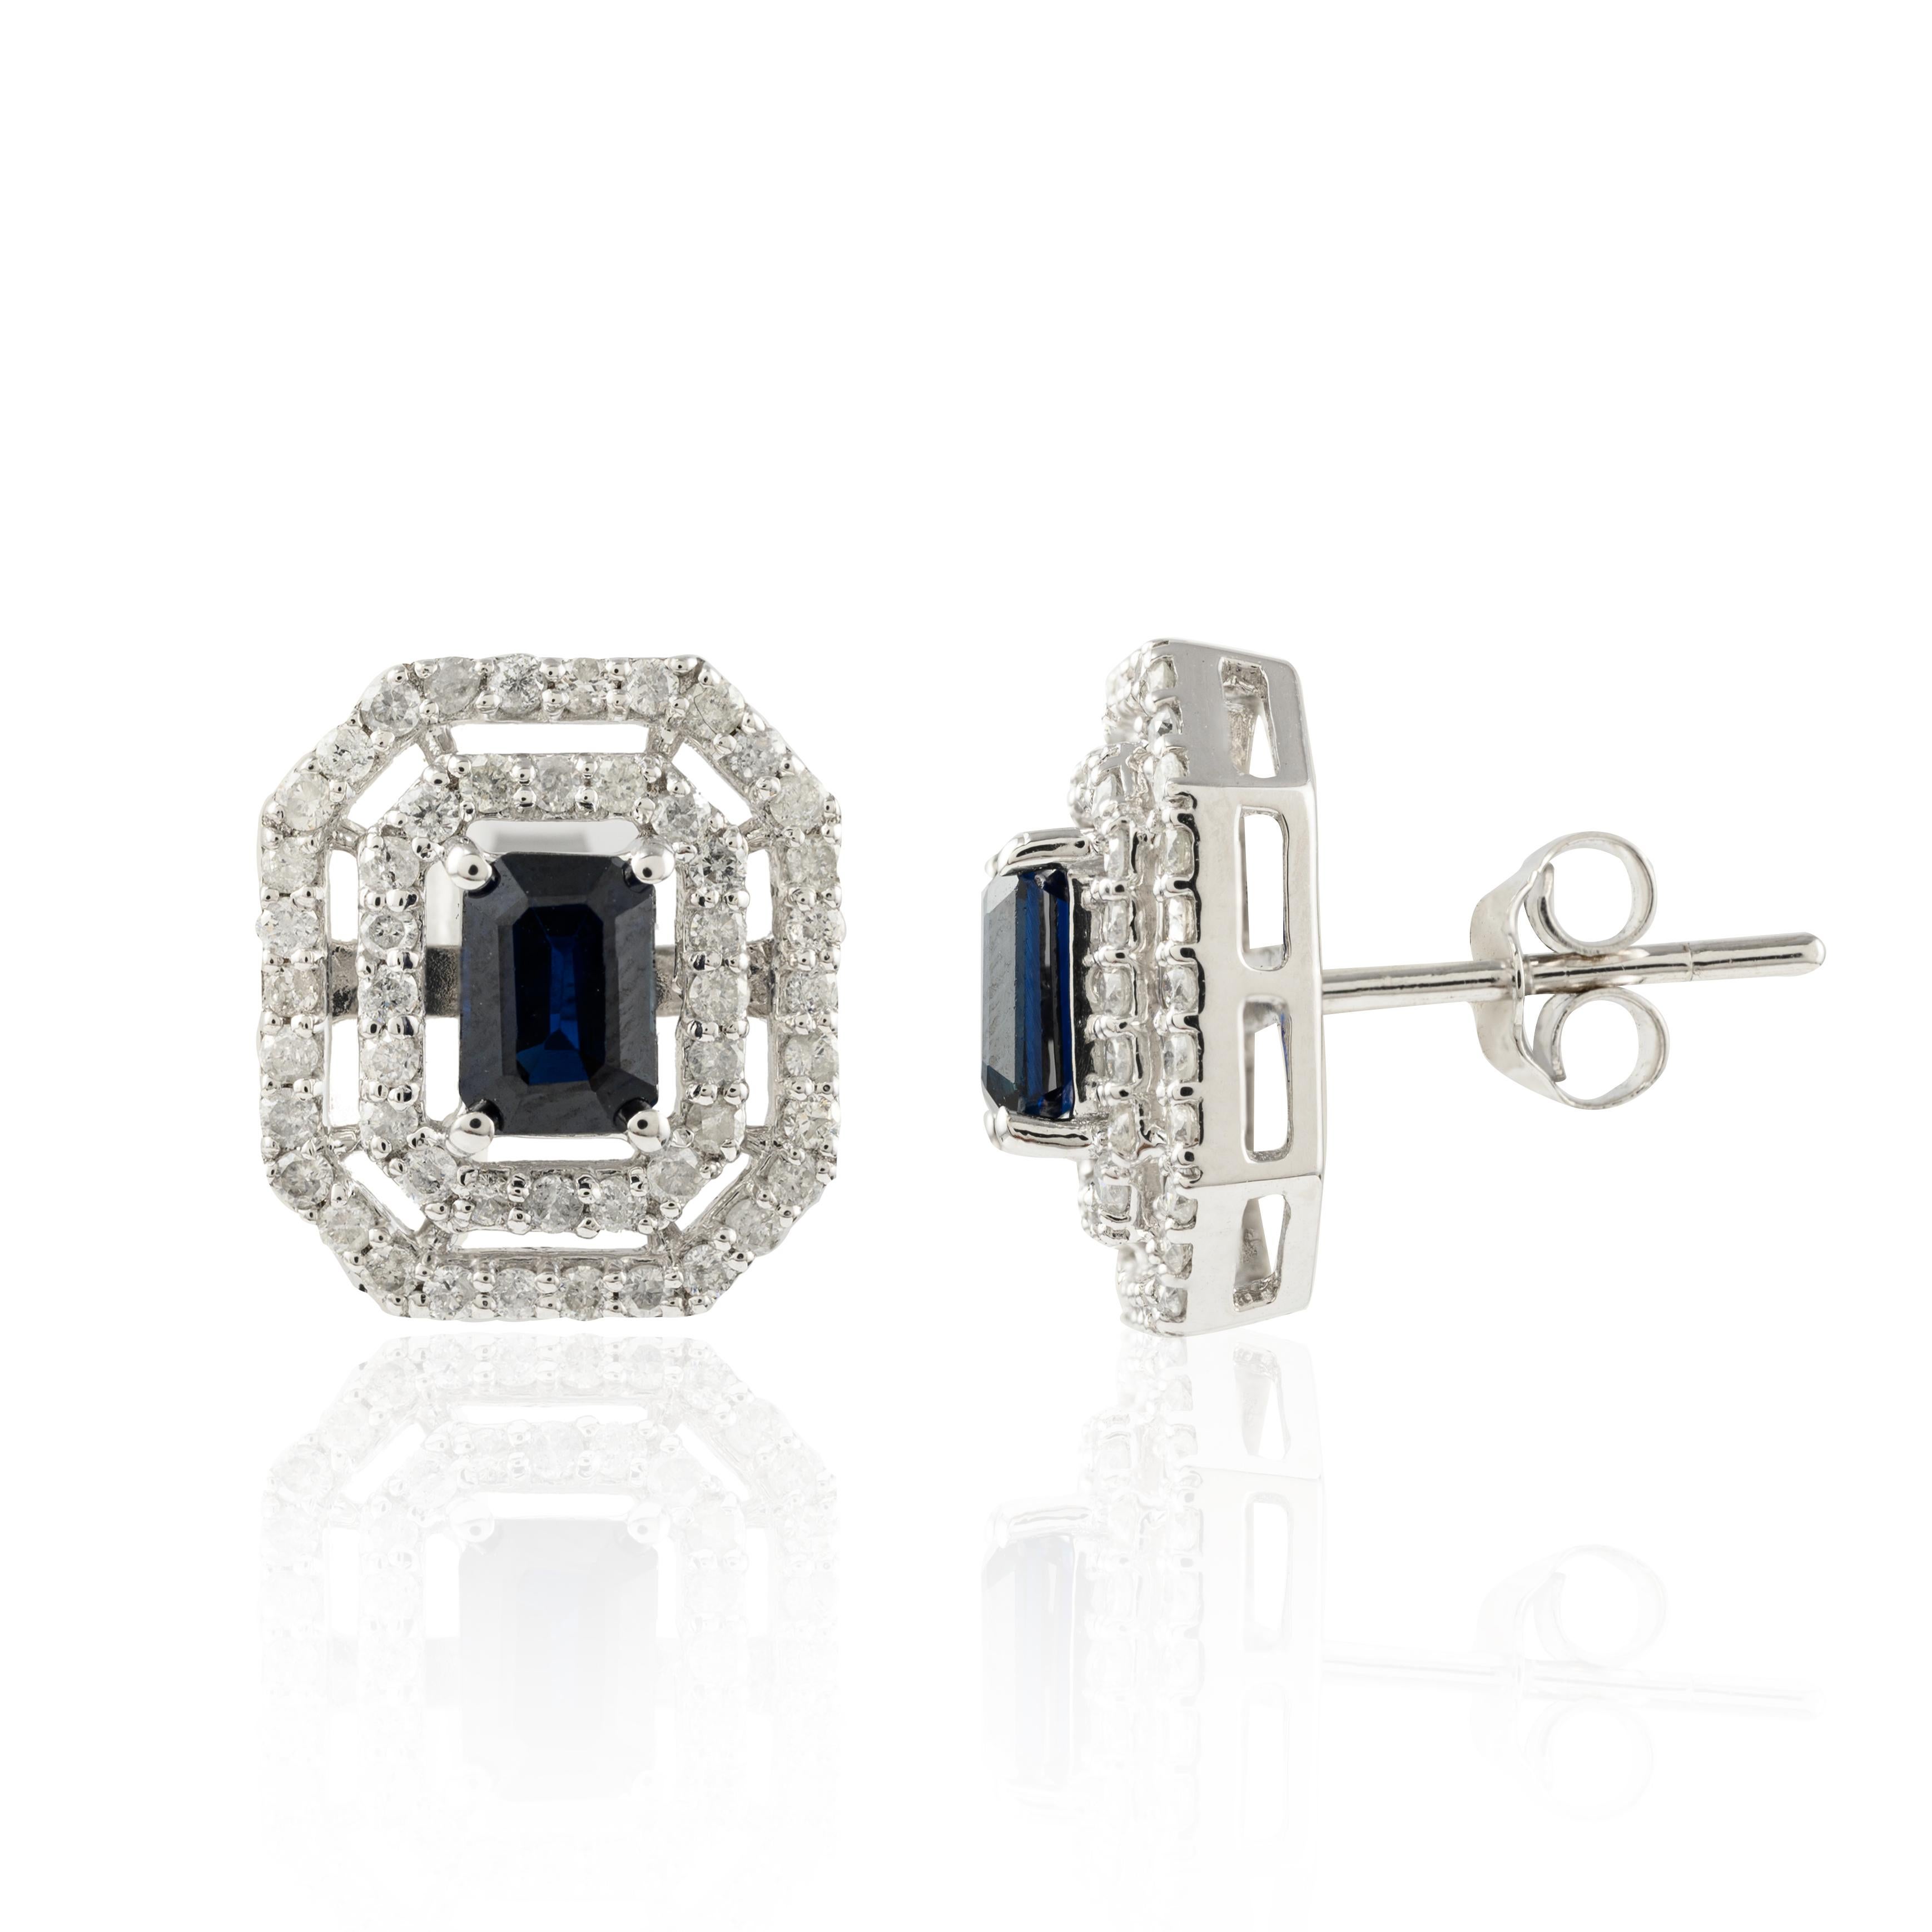 Regal Blue Sapphire Diamond Wedding Stud Earrings in 14K Gold to make a statement with your look. You shall need stud earrings to make a statement with your look. These earrings create a sparkling, luxurious look featuring octagon cut